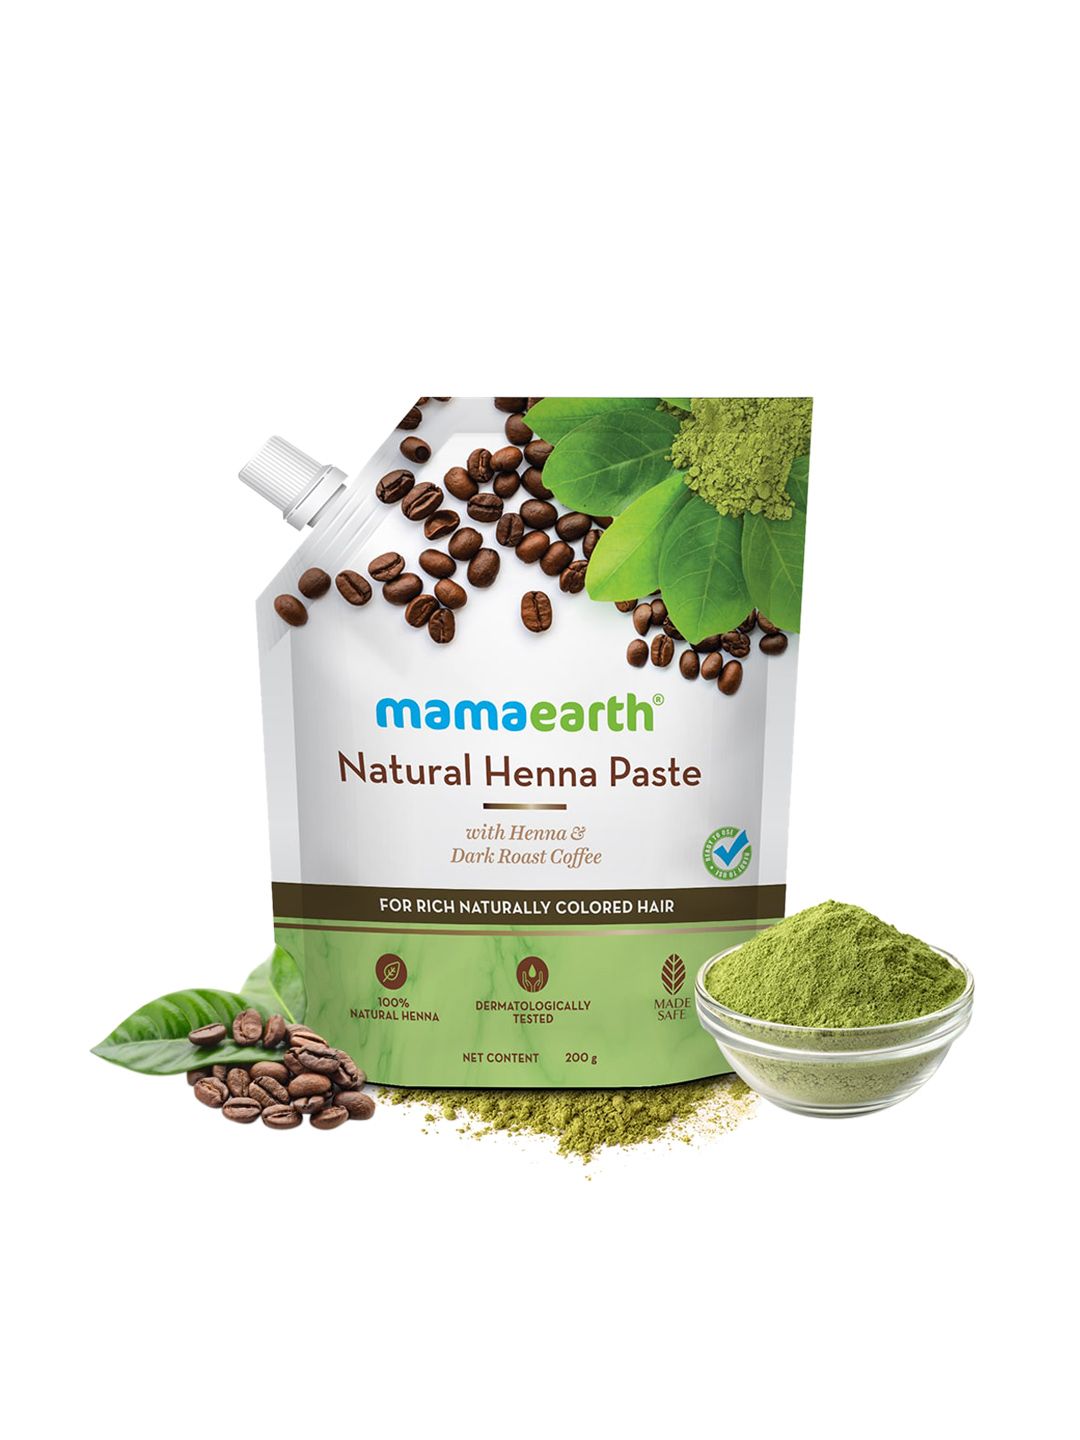 Mamaearth Natural Henna Paste with Henna & Dark Roasted Coffee - 200 g Price in India